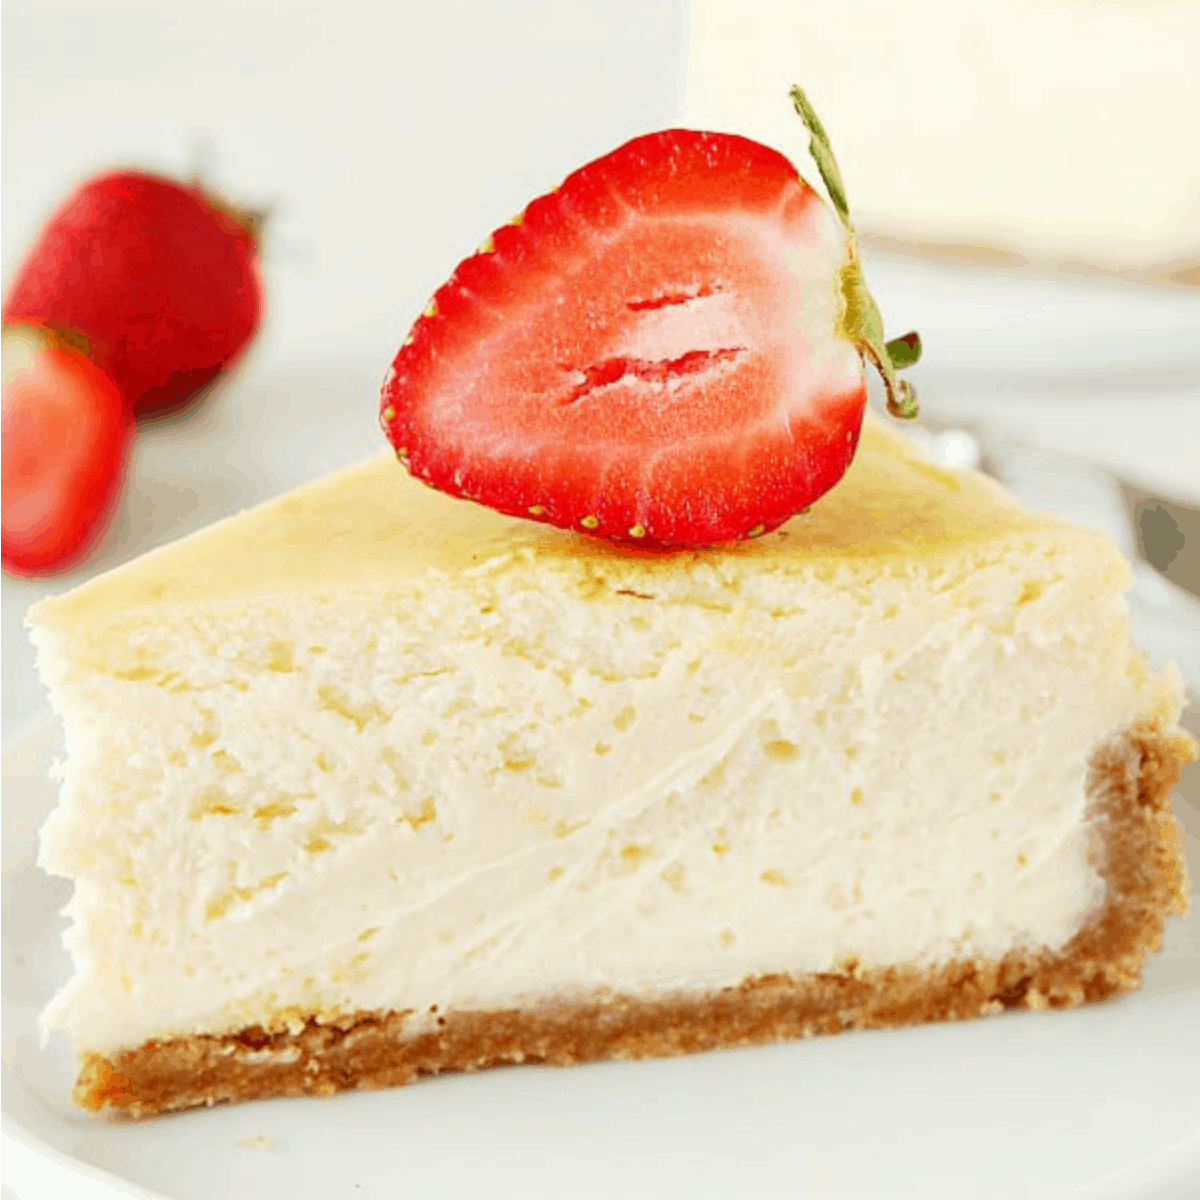 Small Cheesecake Recipes 6 Inch Pans - New York Keto Cheesecake Recipe All Day I Dream About ...